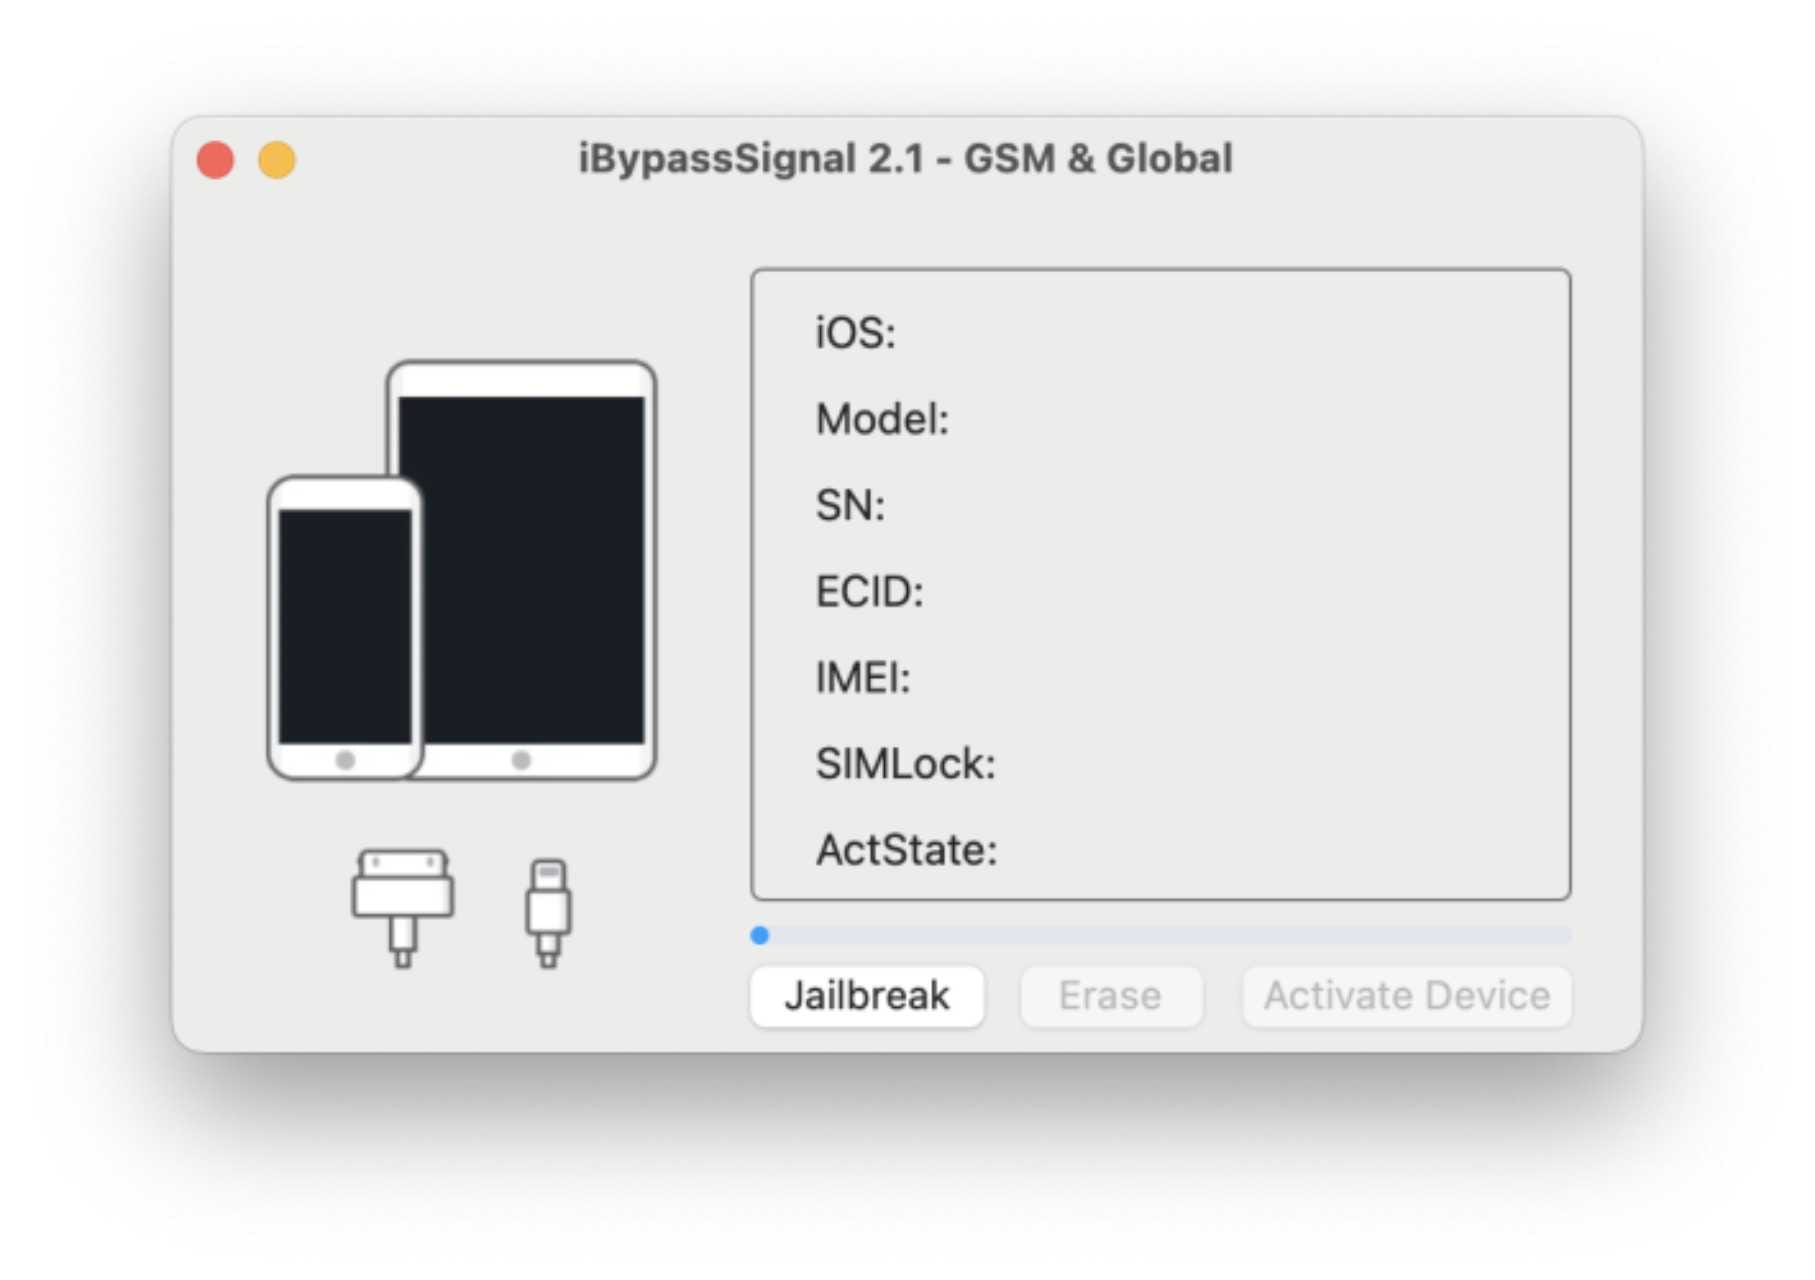 iBypassSignal iCloud Bypass with signal support on iOS